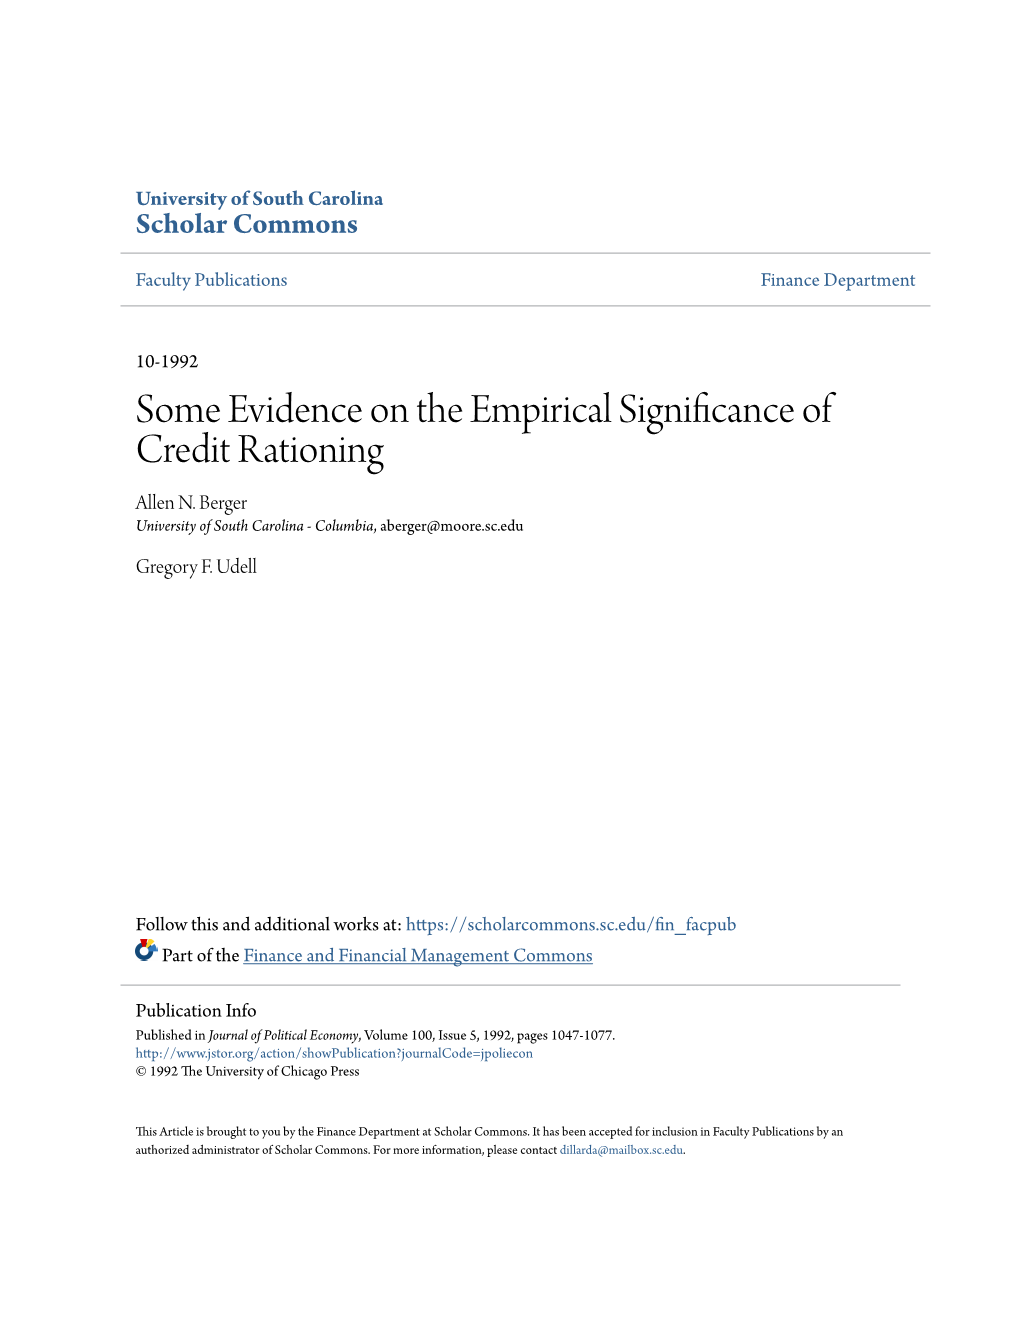 Some Evidence on the Empirical Significance of Credit Rationing Allen N